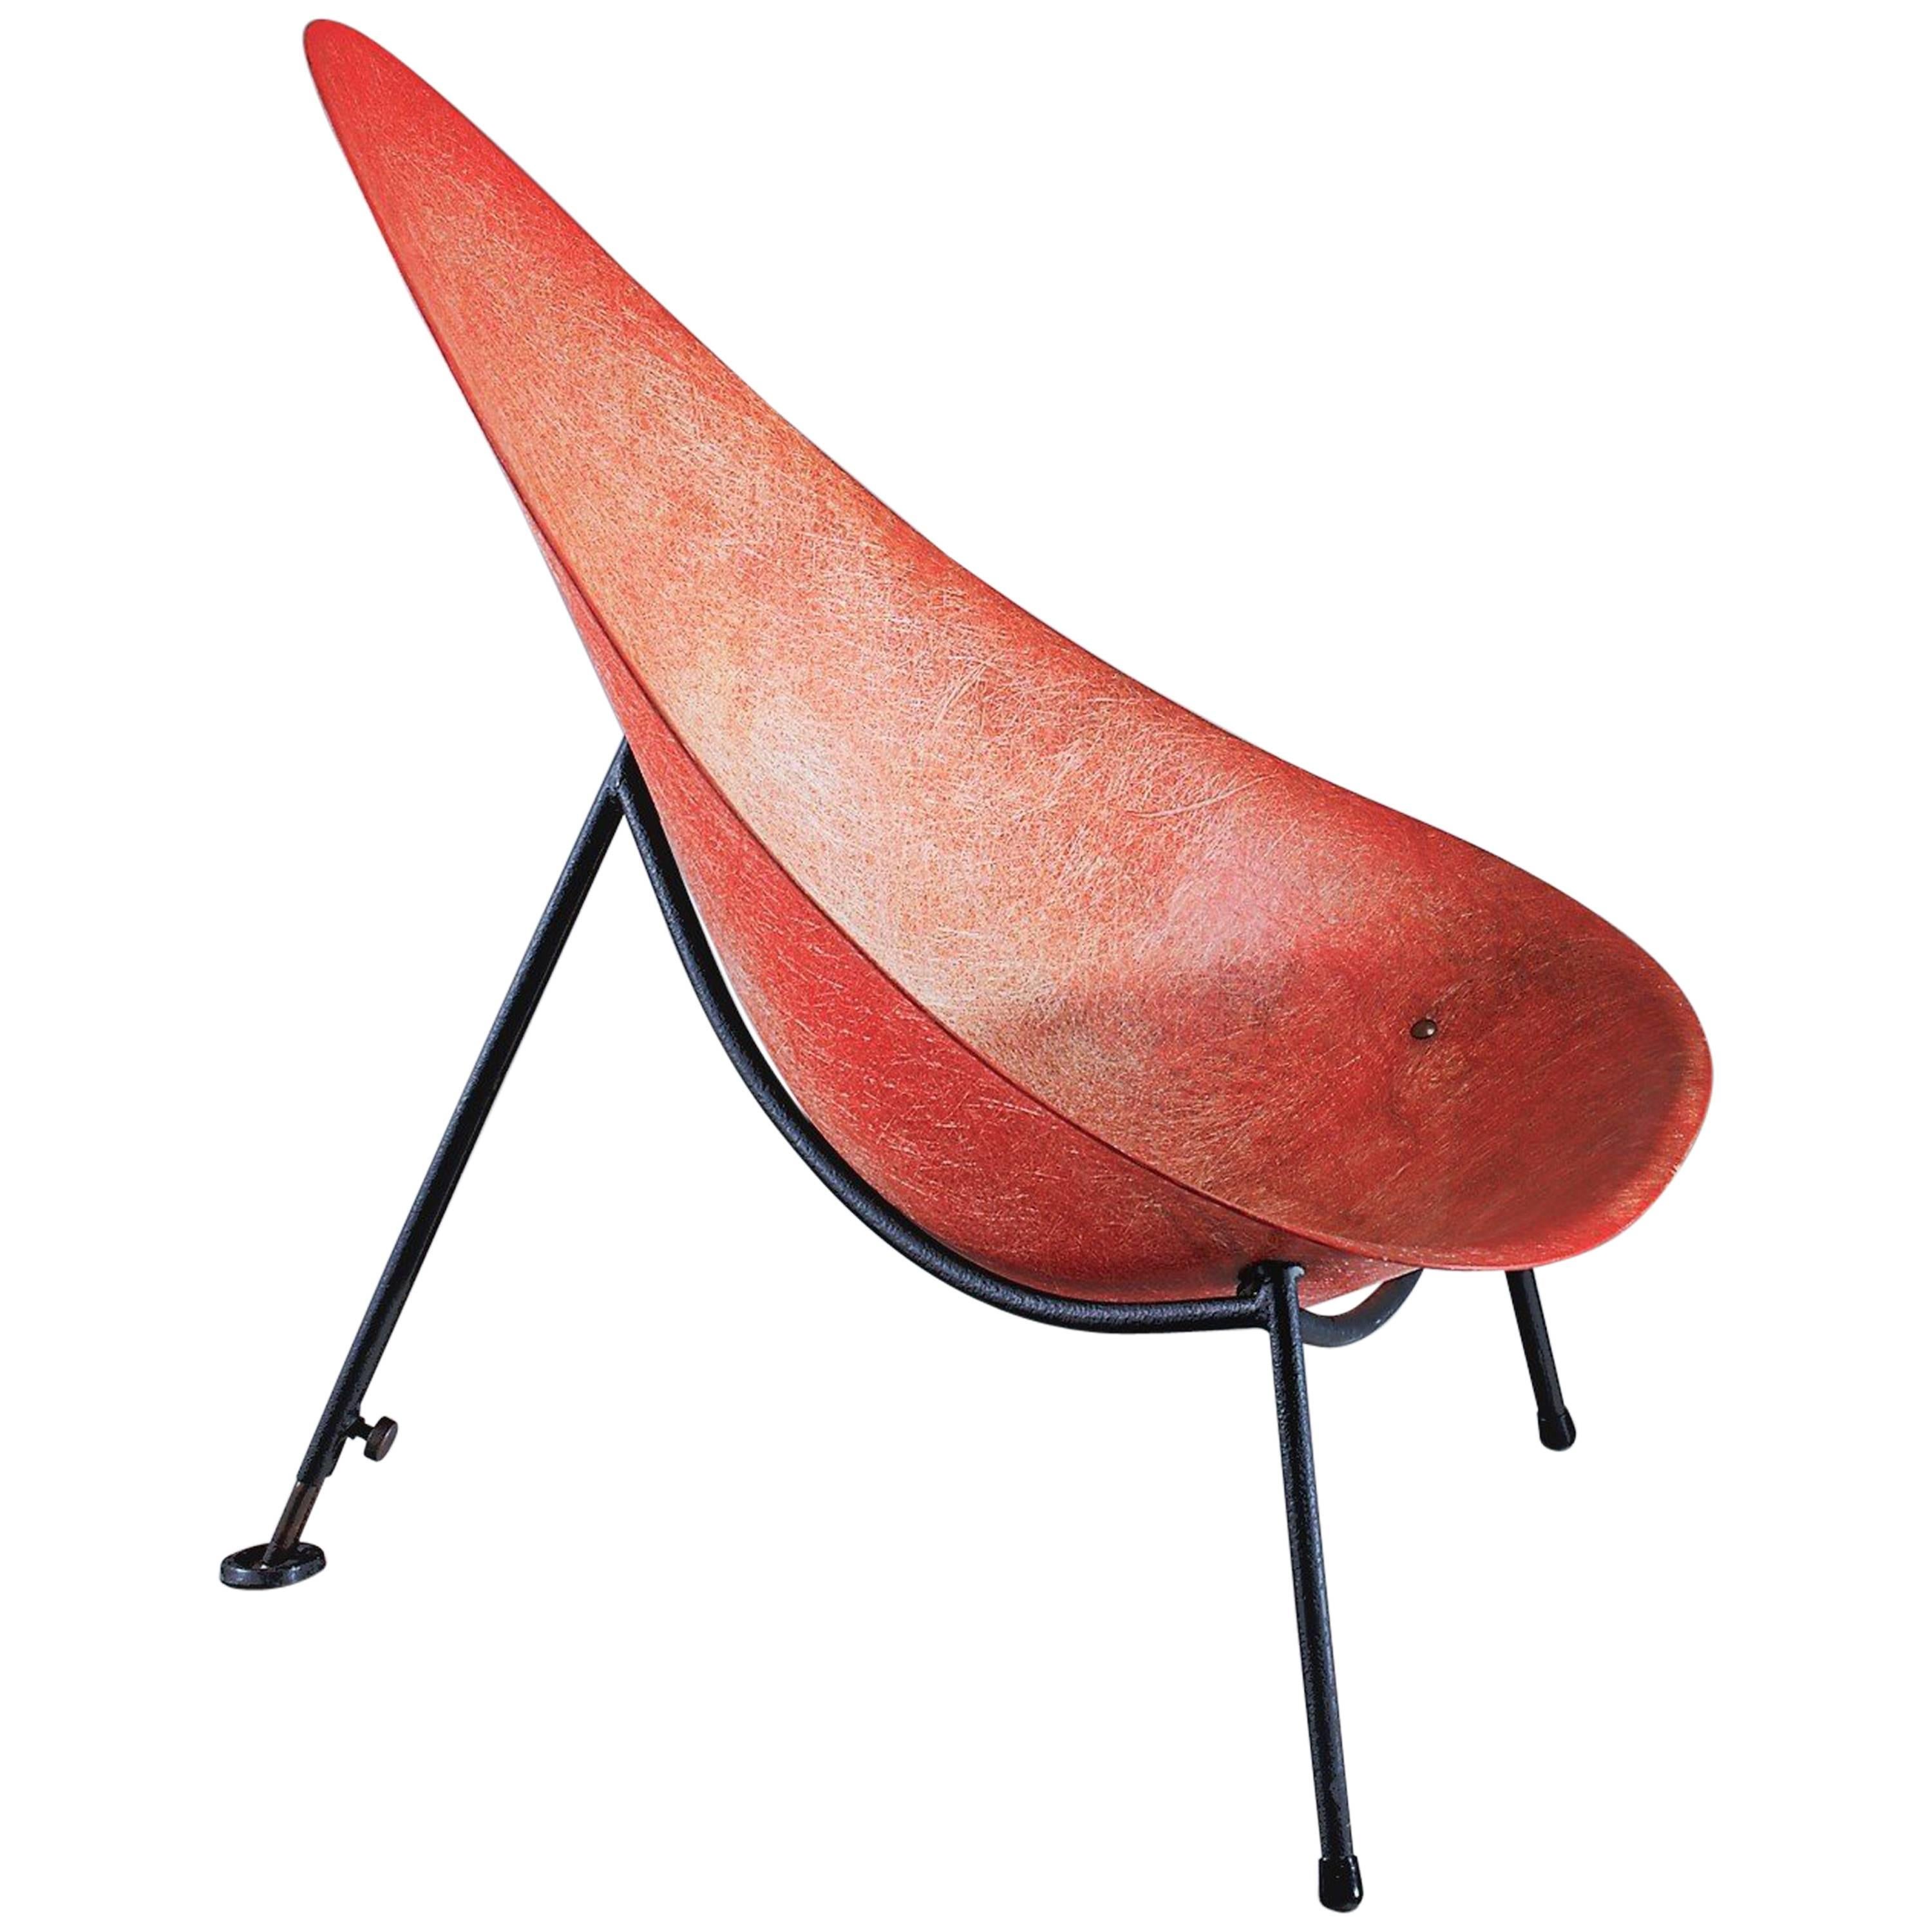 Merat Early French Fiberglass Easy Chair in Red, 1950s For Sale